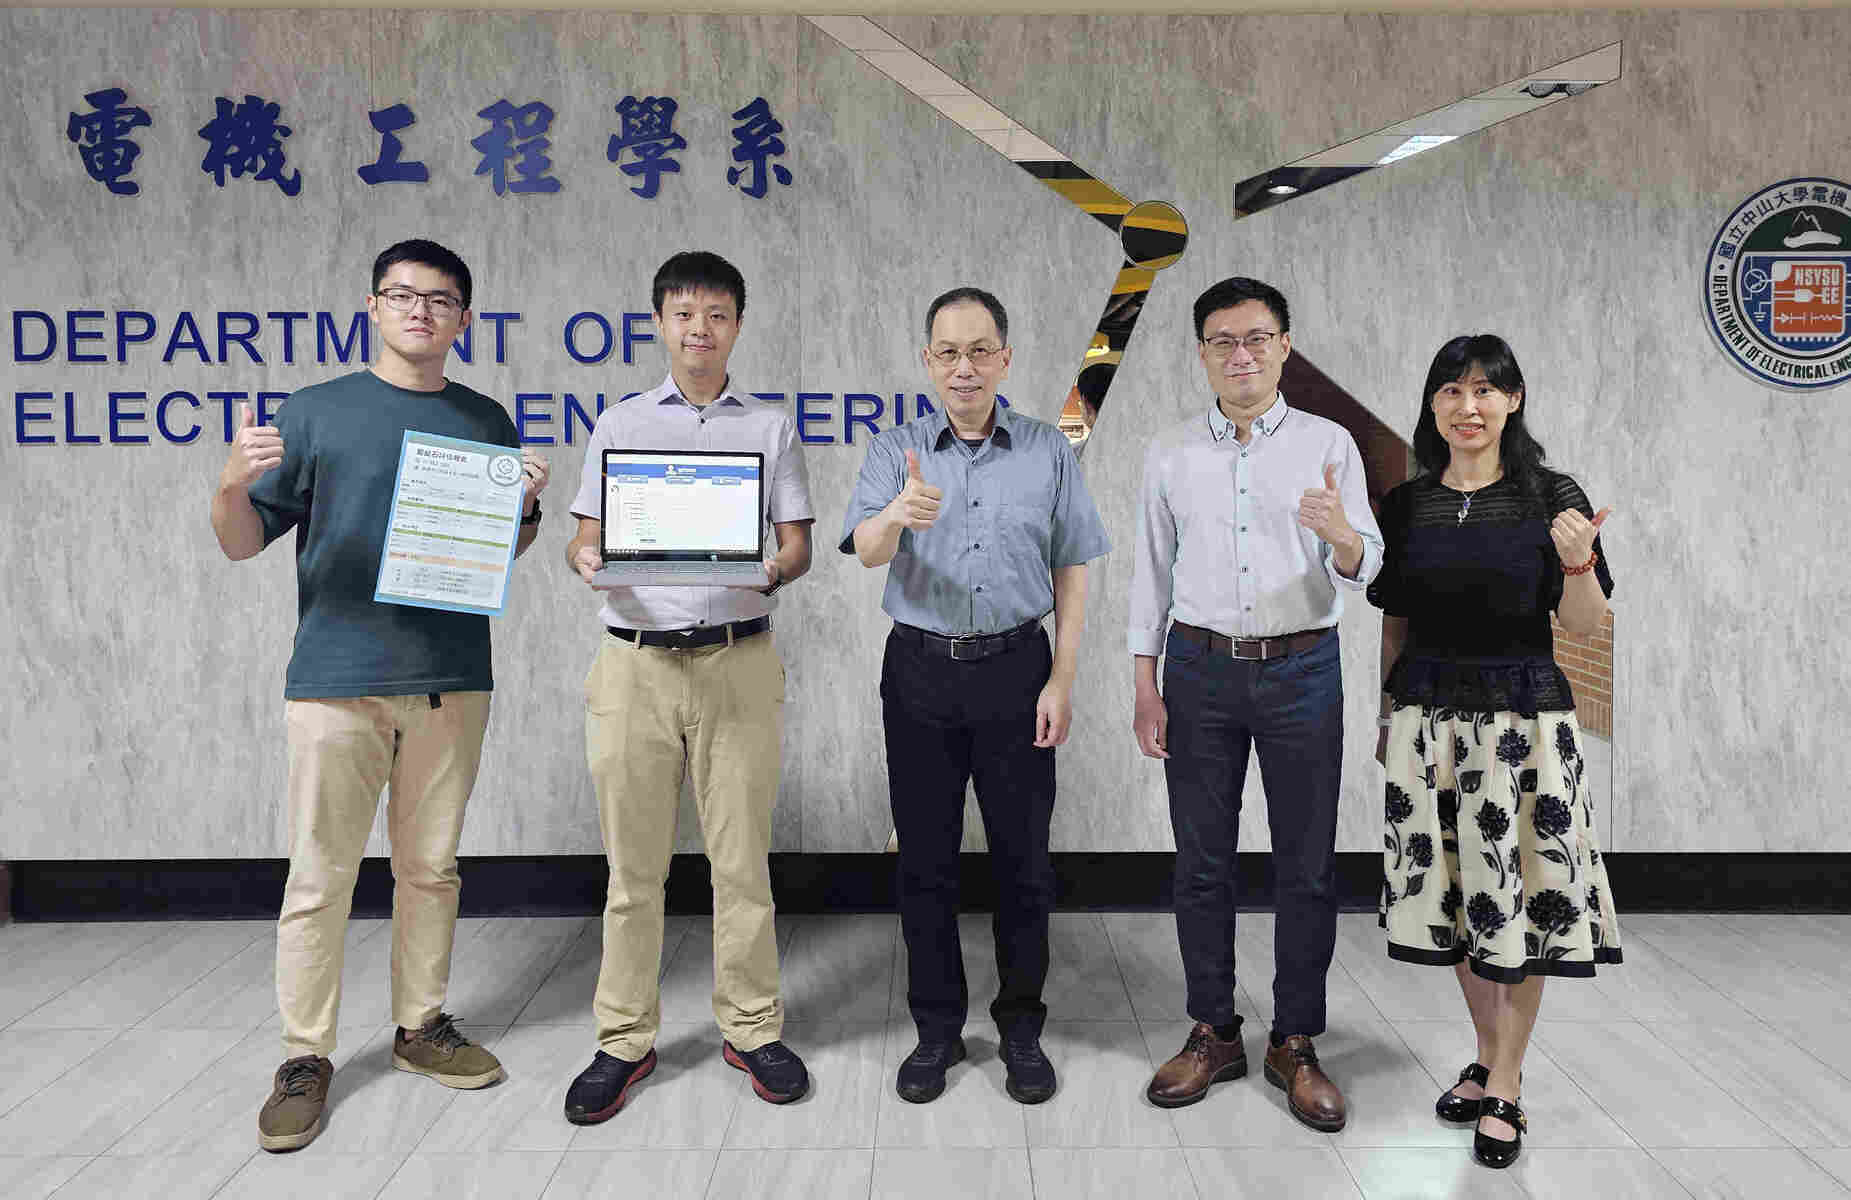 The “Surgery-Free AI Uric Acid Stone Prognostic System” was developed by the cross-school, cross-disciplinary research team that was led by Dr. Chung-Yao Kao (middle), a Professor of the Department of Electrical Engineering at NSYSU and Dr. Hao-Wei Chen (second from the right) of the Department of Urology at KMU